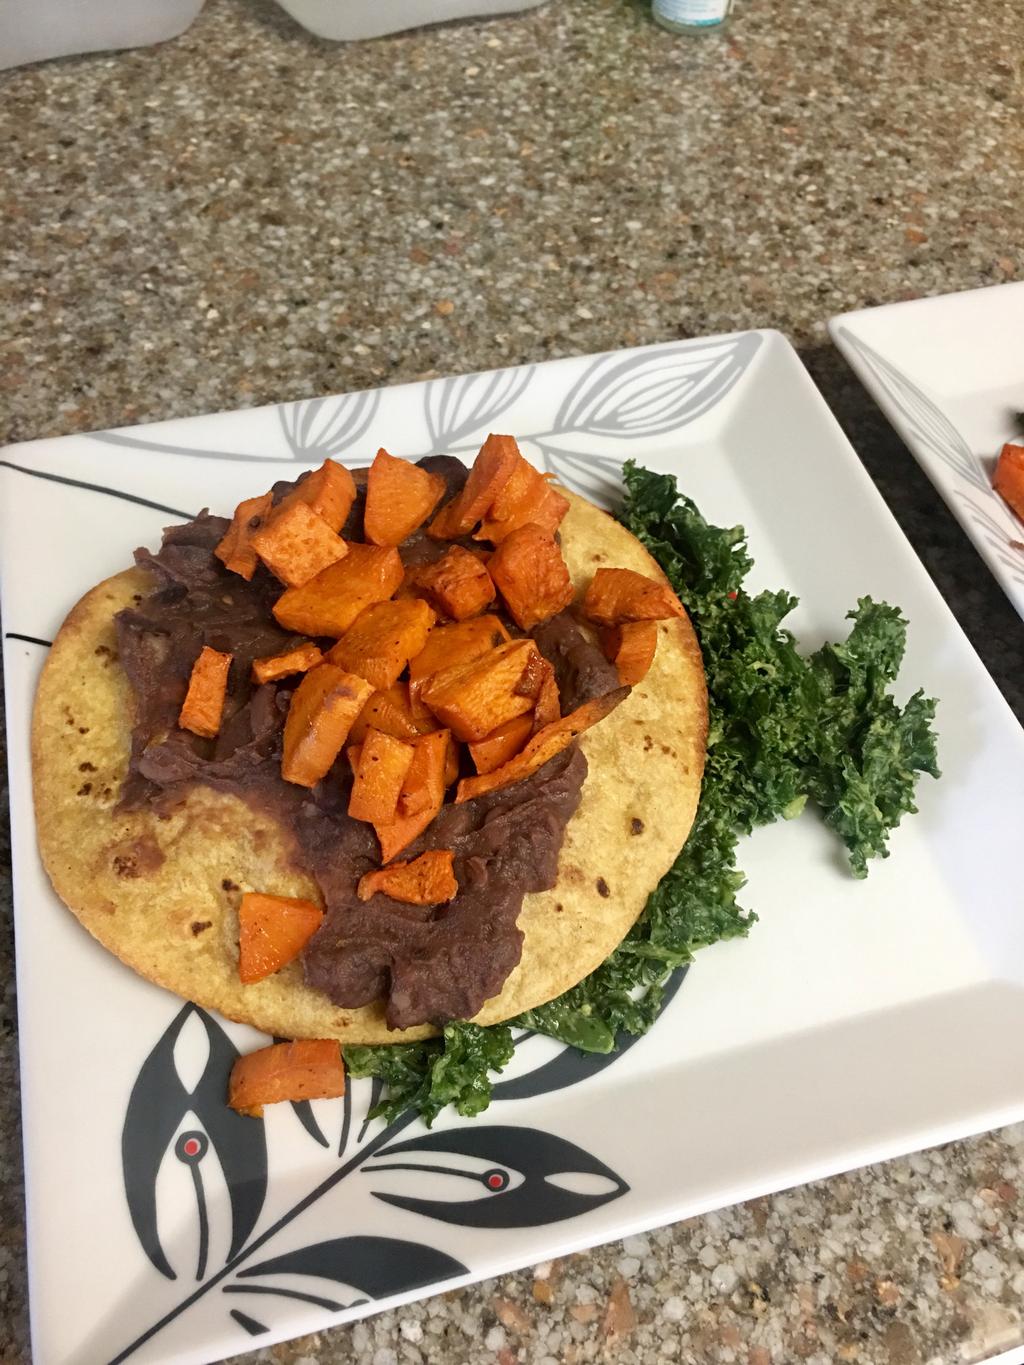 PLAY VIDEO Sweet Potato & Black Bean Tostadas 3 sweet potatoes (peeled and cubed) 2 tbsp Olive Oil 1/2 tsp chili powder Sea Salt 1 can refried black beans 8 corn tortillas 1 tbsp olive oil for